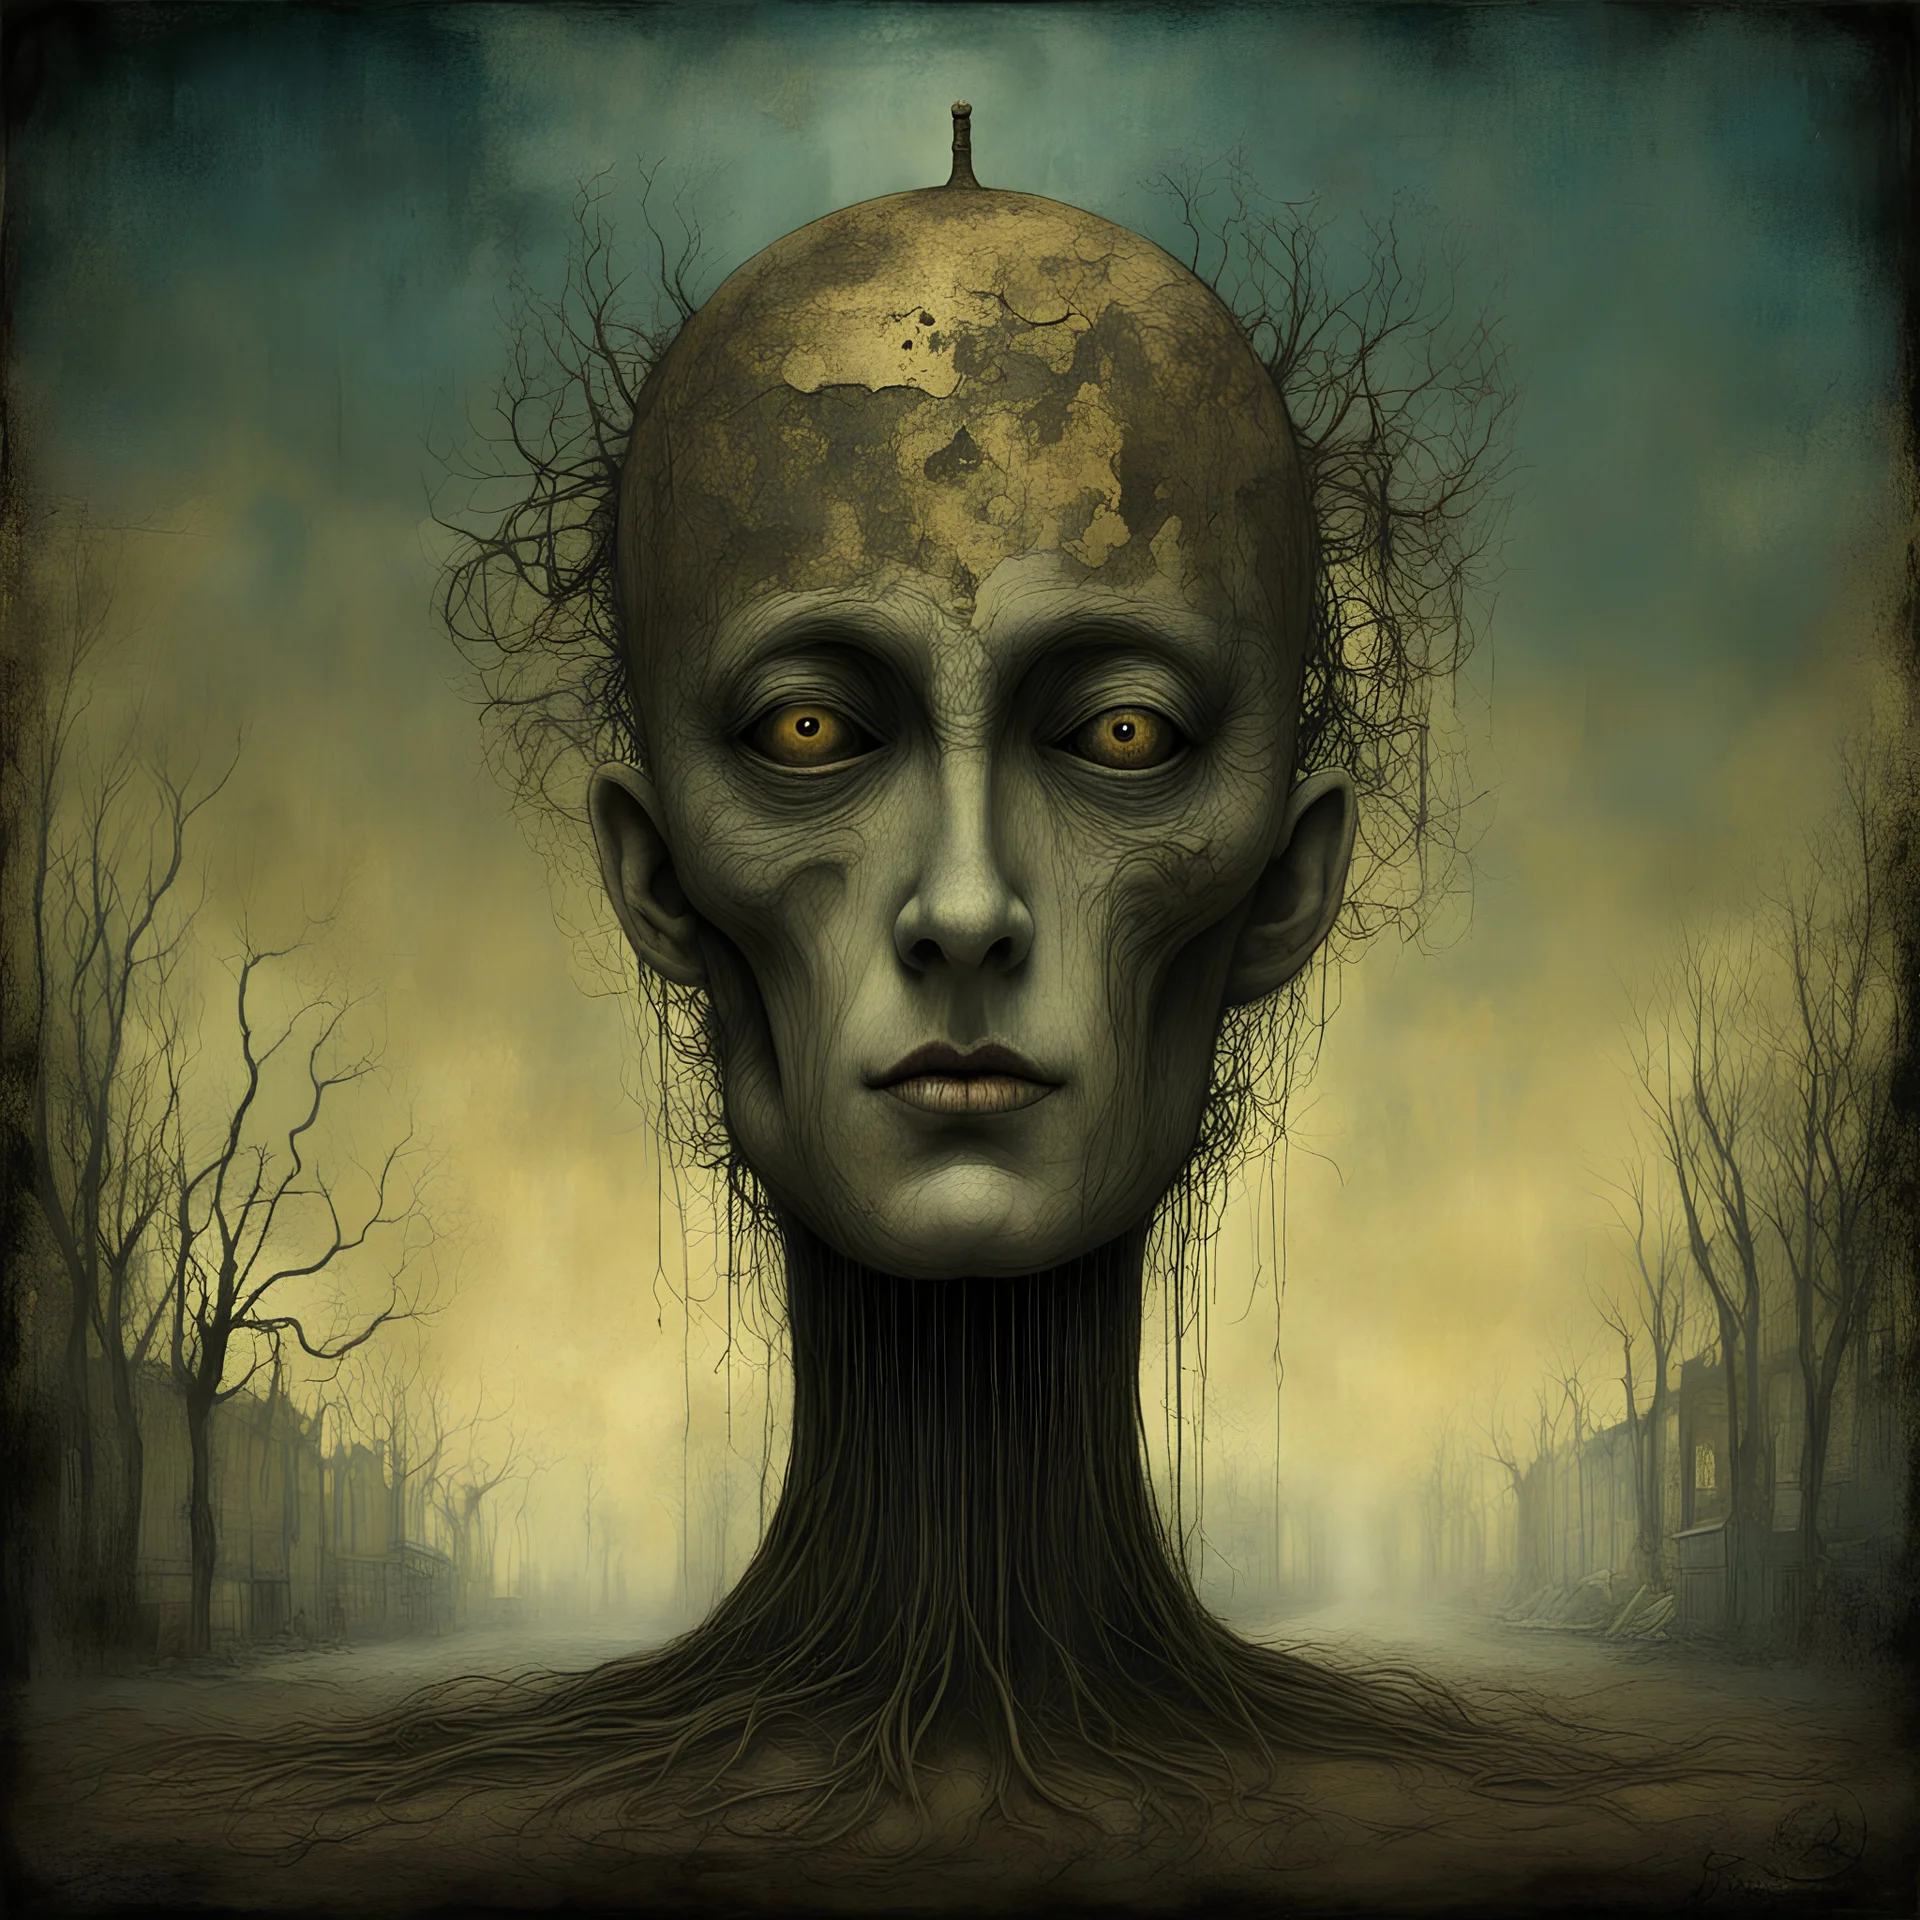 frightening night memory of an abandoned sideshow come to life, Gabriel Pacheco and Zdzislaw Beksinski deliver a surreal masterpiece, nightmare, rich colors, sinister, creepy, sharp focus, dark shines, asymmetric, additional surreal elements by Desmond Morris